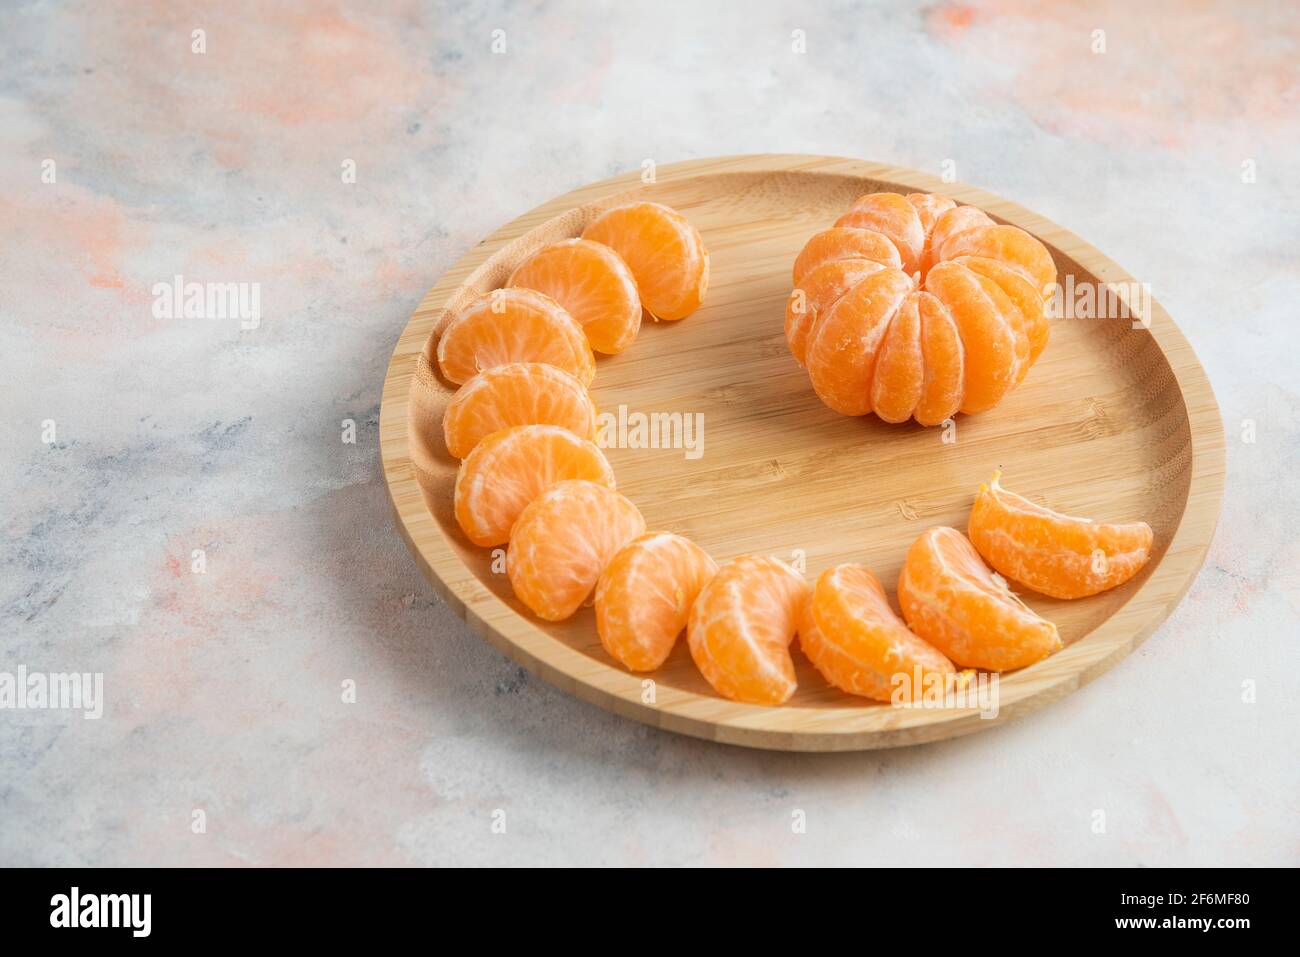 Peeled clementine mandarins over wooden plate on background Stock Photo